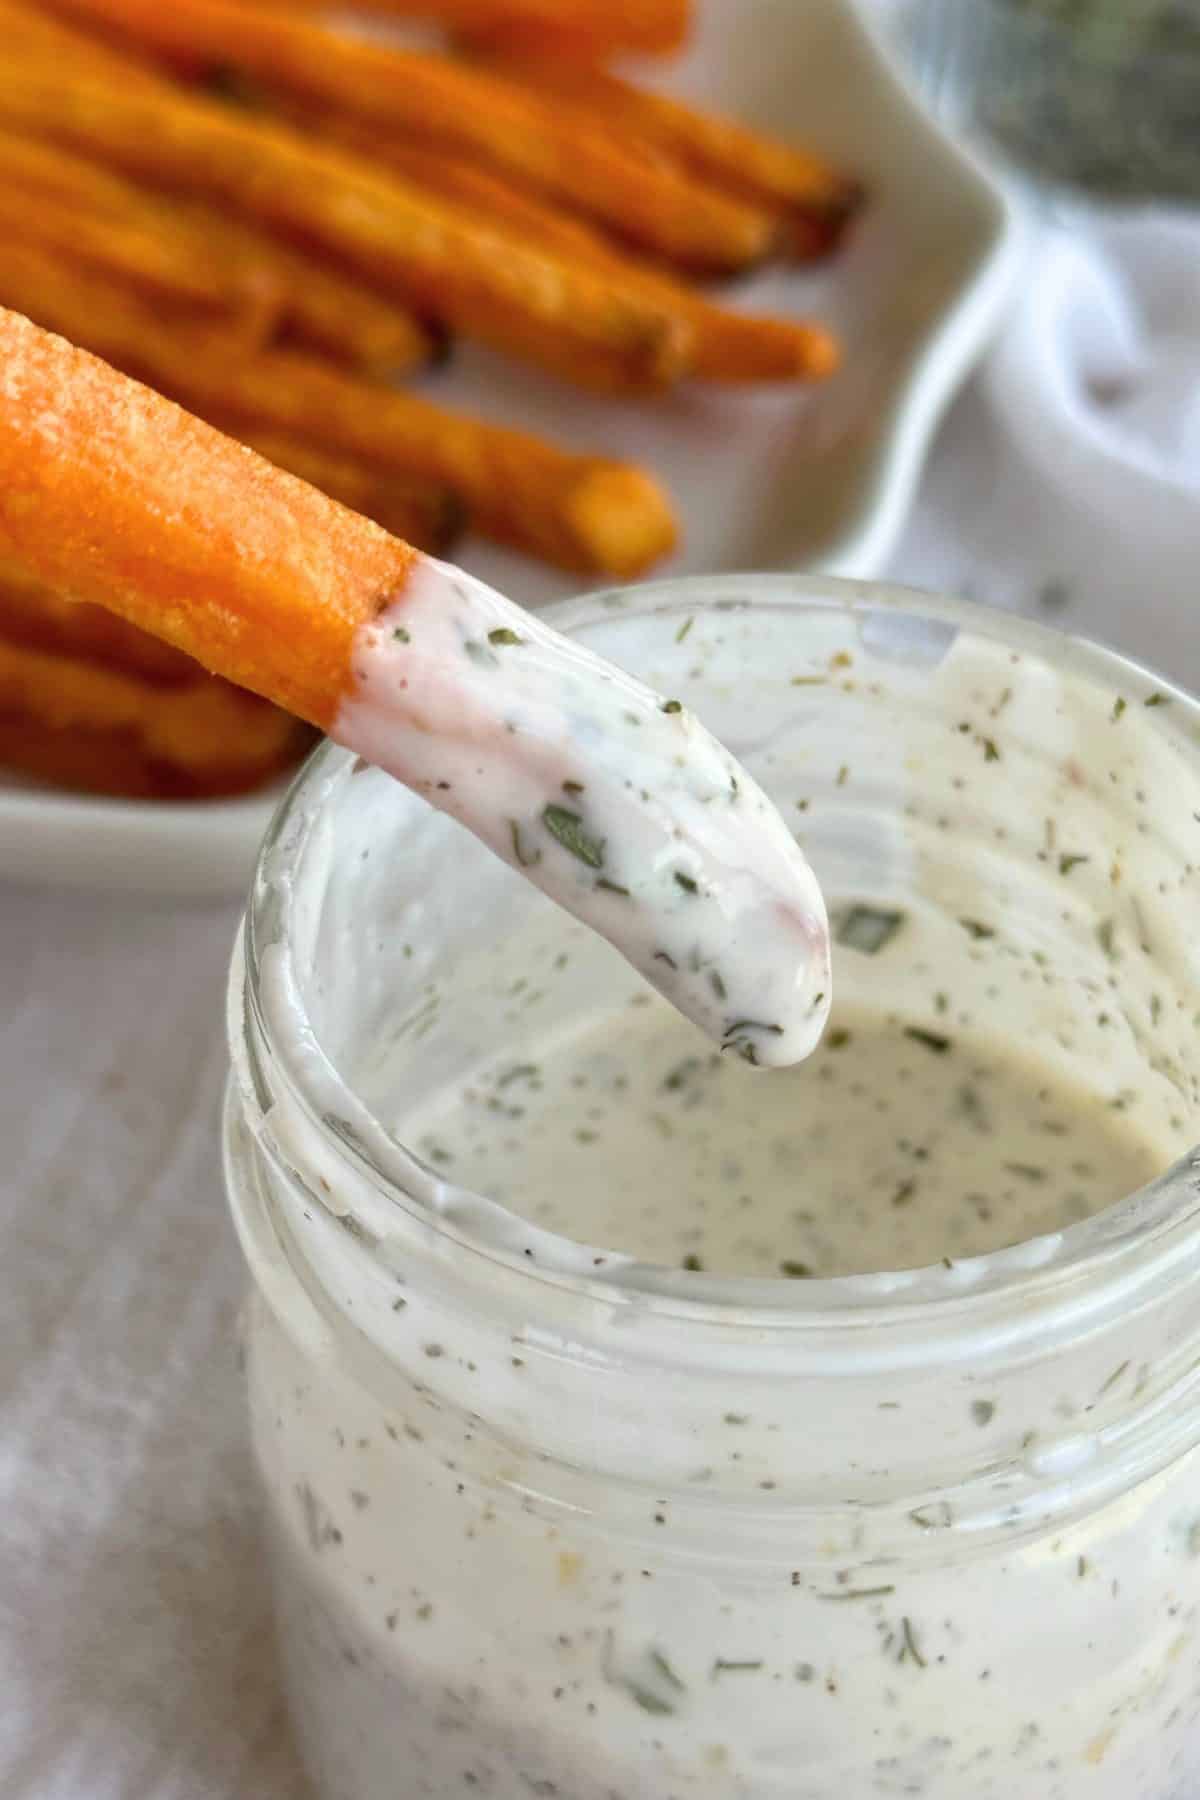 Sweet potato fry dipped in vegan ranch dressing. Glass jar filled with vegan ranch dressing, plate with sweet potato fries, and dairy-free ranch seasoning are in the background on top of a white cloth.